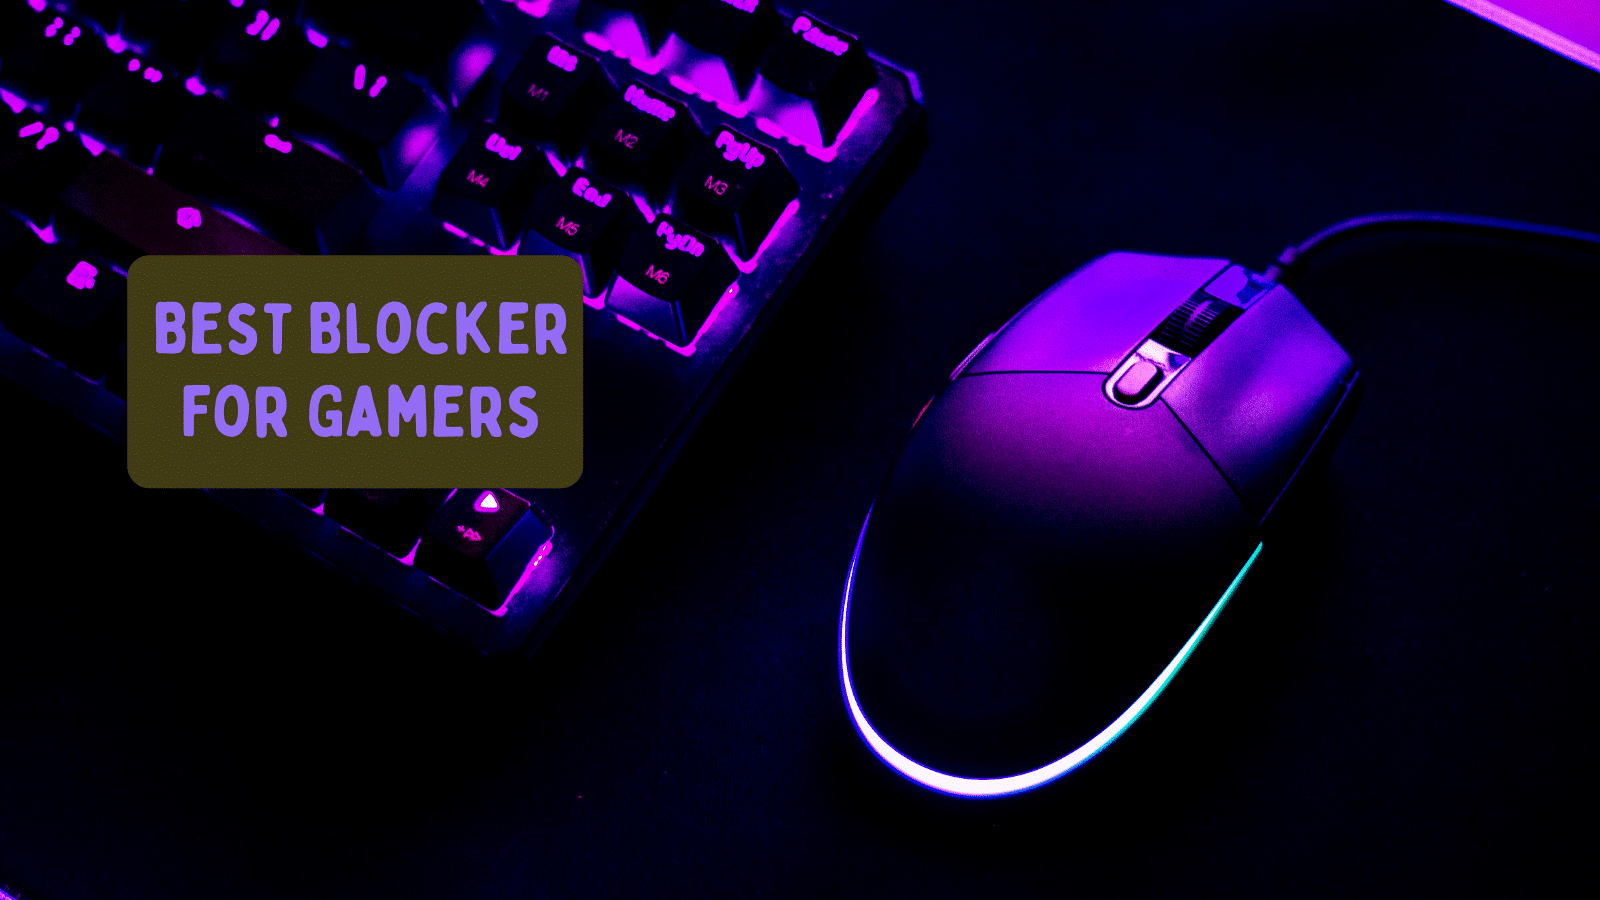 The Best Blockers For Gamers